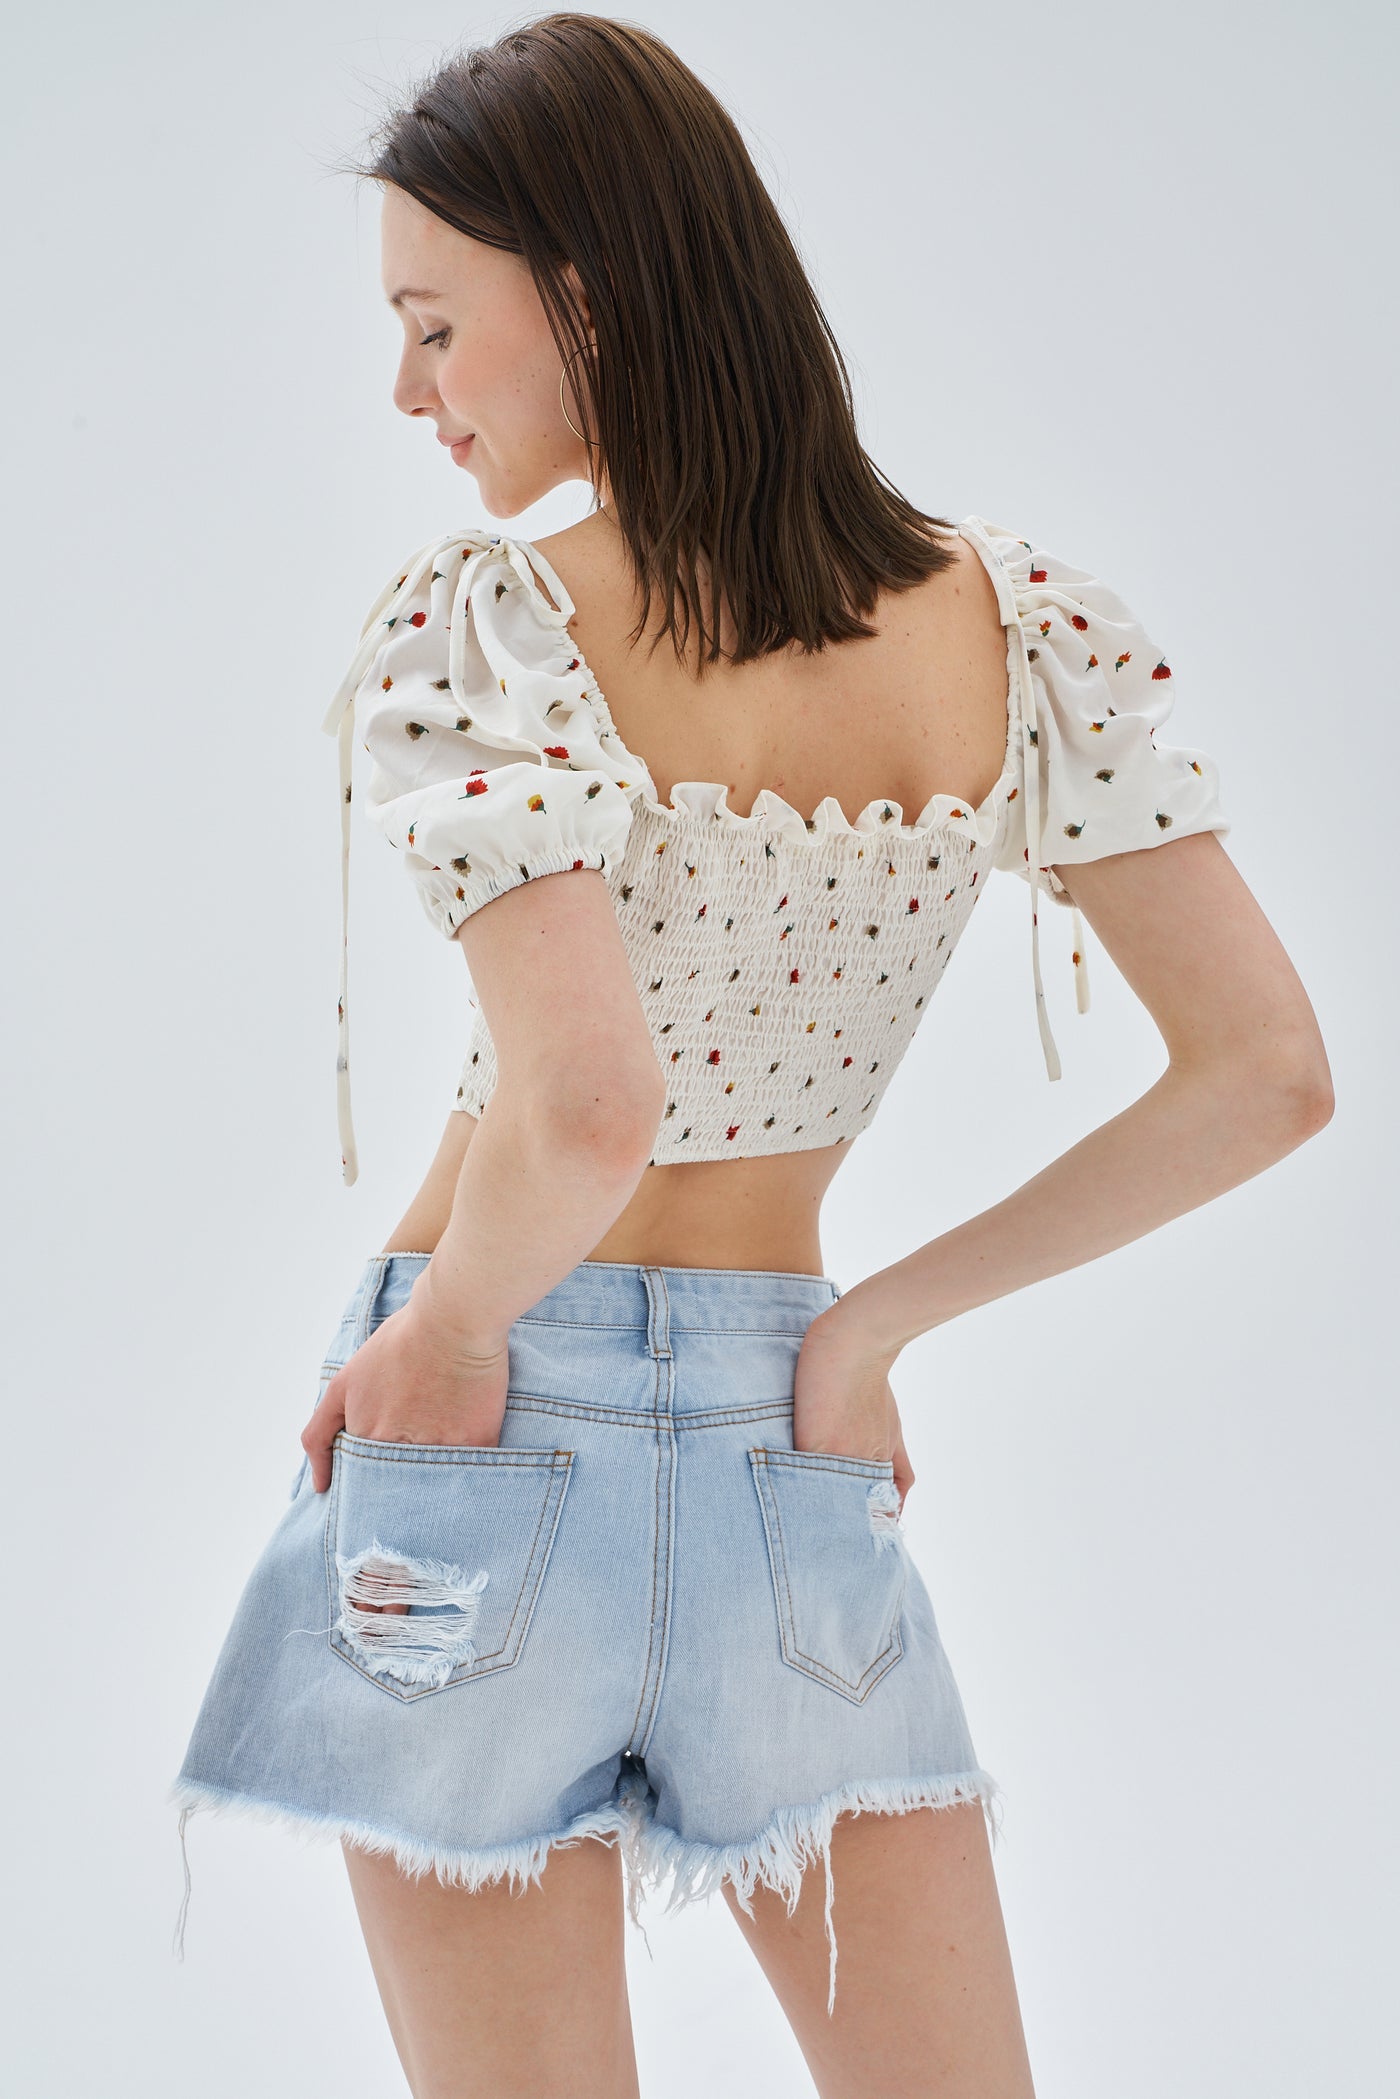 SWEETHEART SHIRRED FLORAL TOP